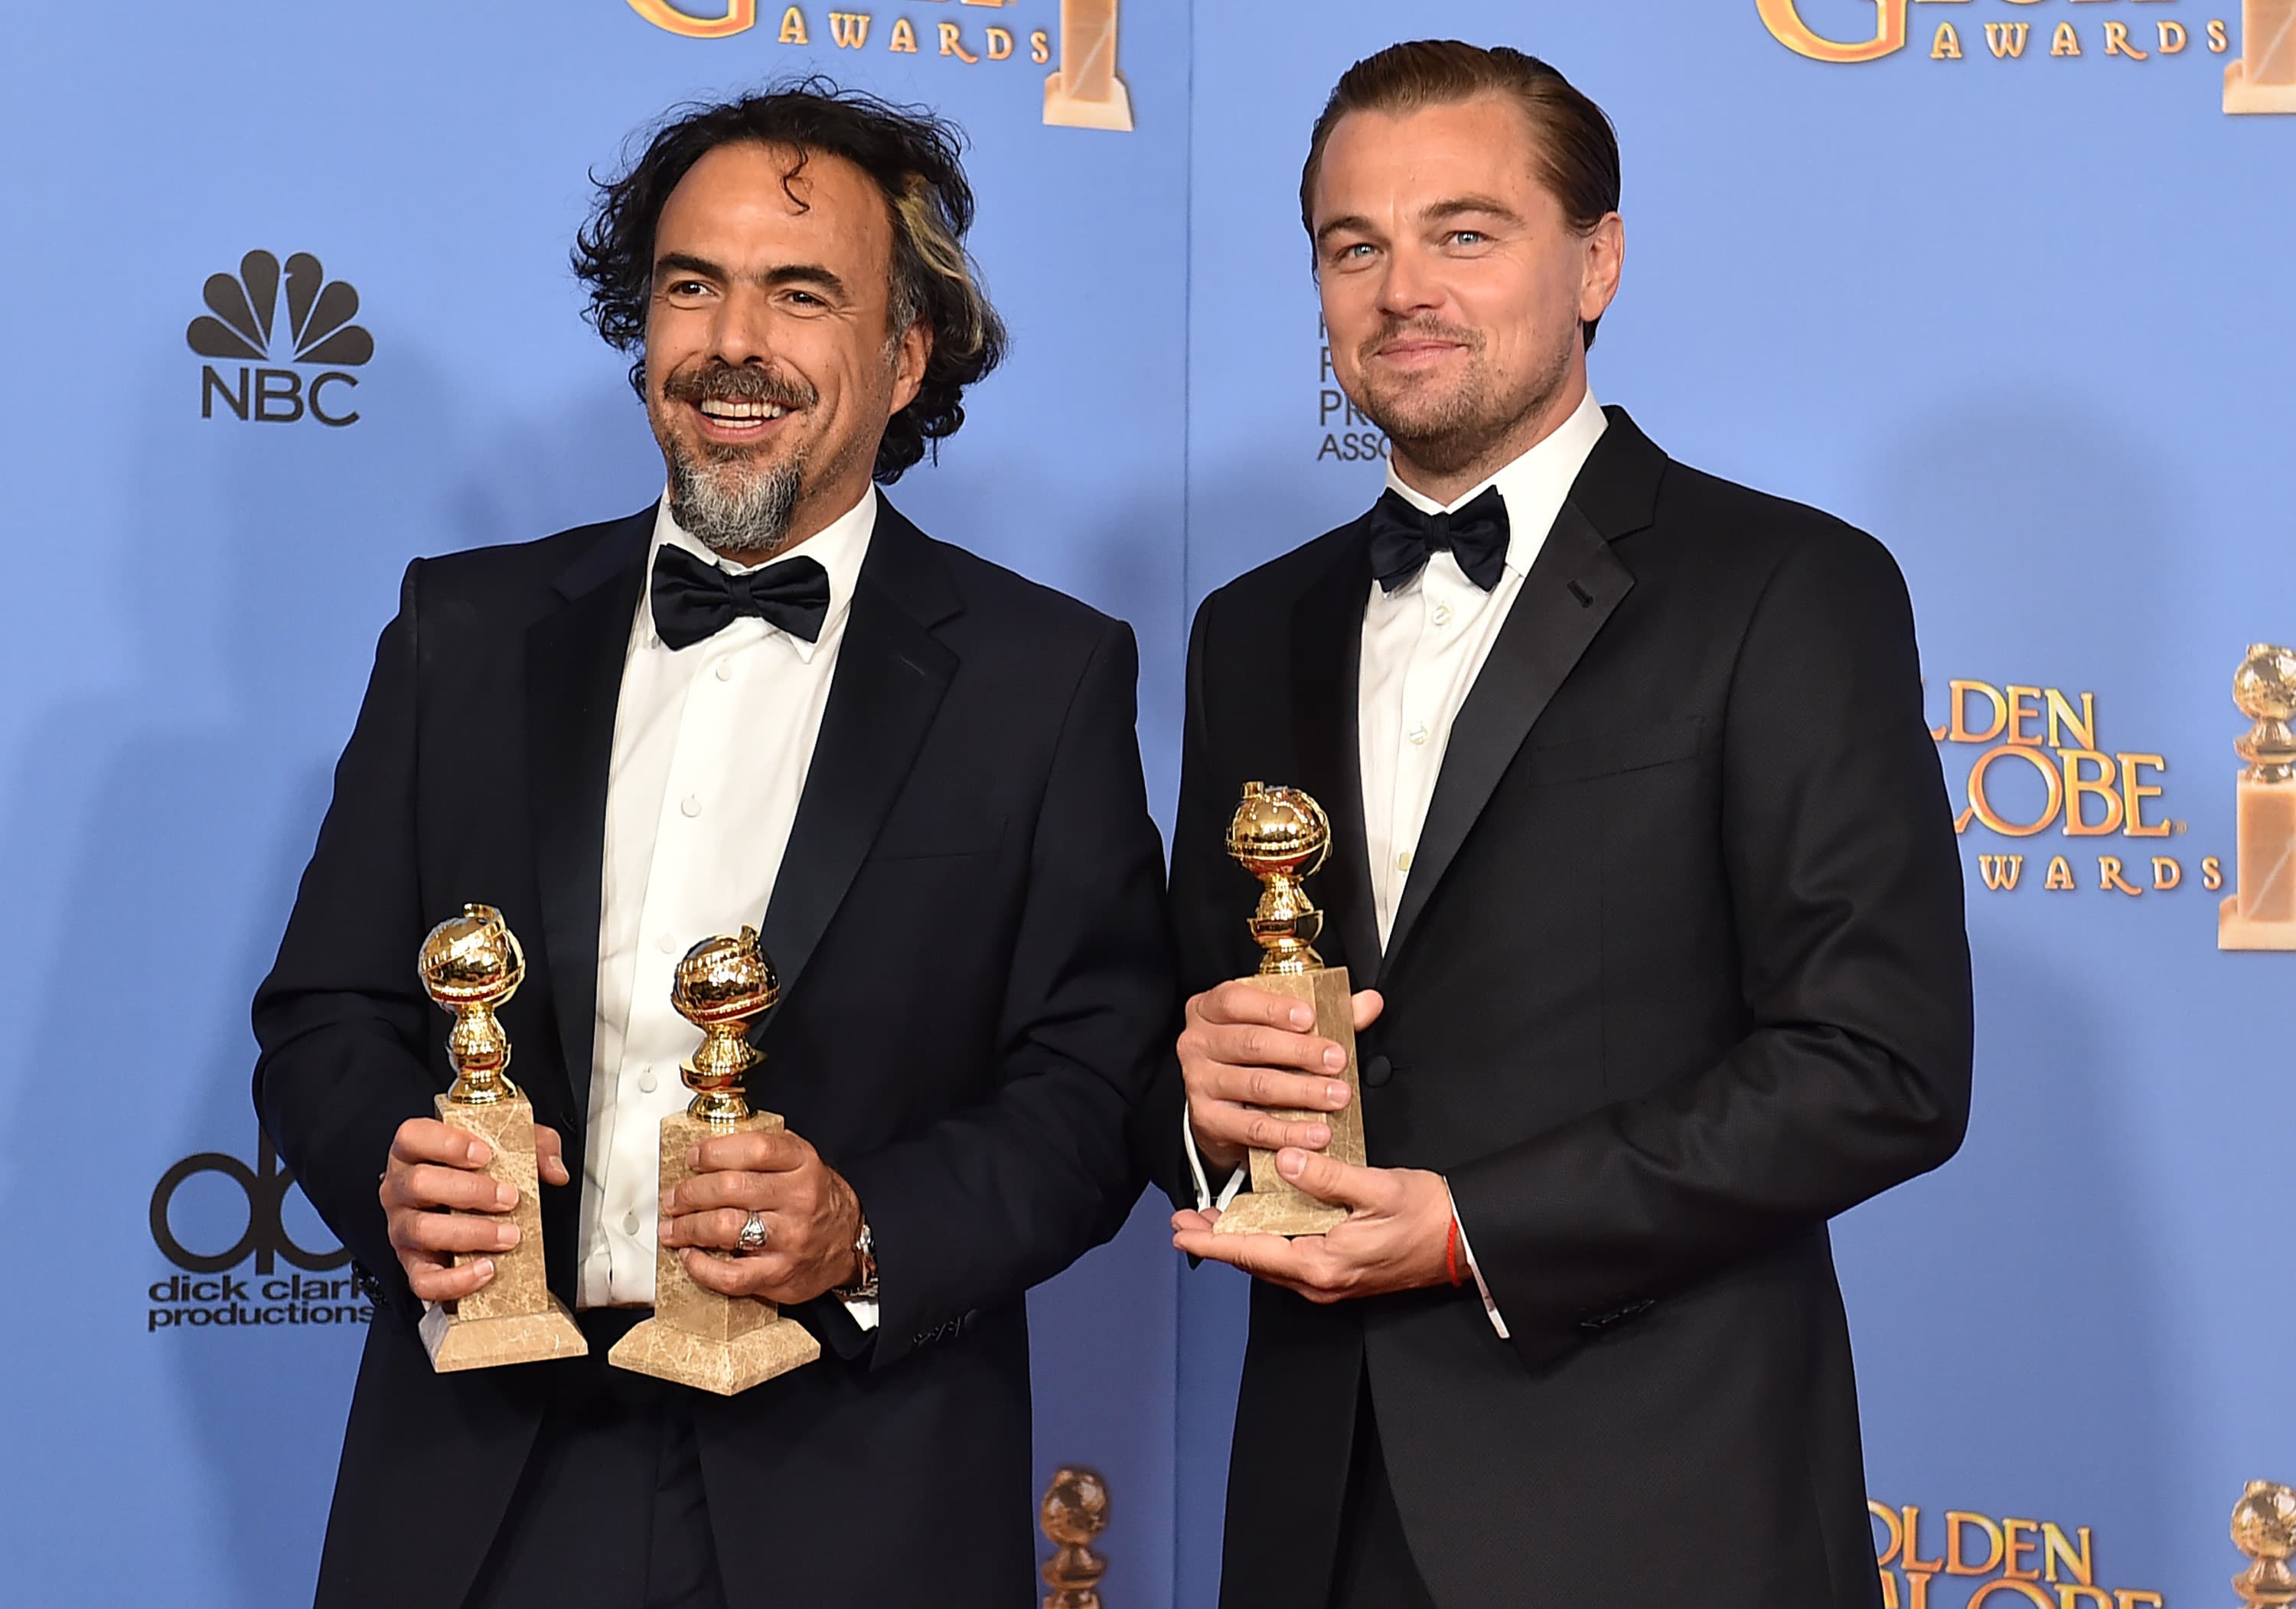 WIT PR would like to extend congratulations to the following nominees and winners at this year’s Golden Globes: Motion Picture, Drama The Revenant (WINNER) Room Spotlight   Actress in a Motion Picture, Drama Brie Larson, Room (WINNER) Saoirse Ronan, Brooklyn   Actor in a Motion Picture, Drama Leonardo DiCaprio, The Revenant (WINNER)   Animated Feature Film The Good Dinosaur…